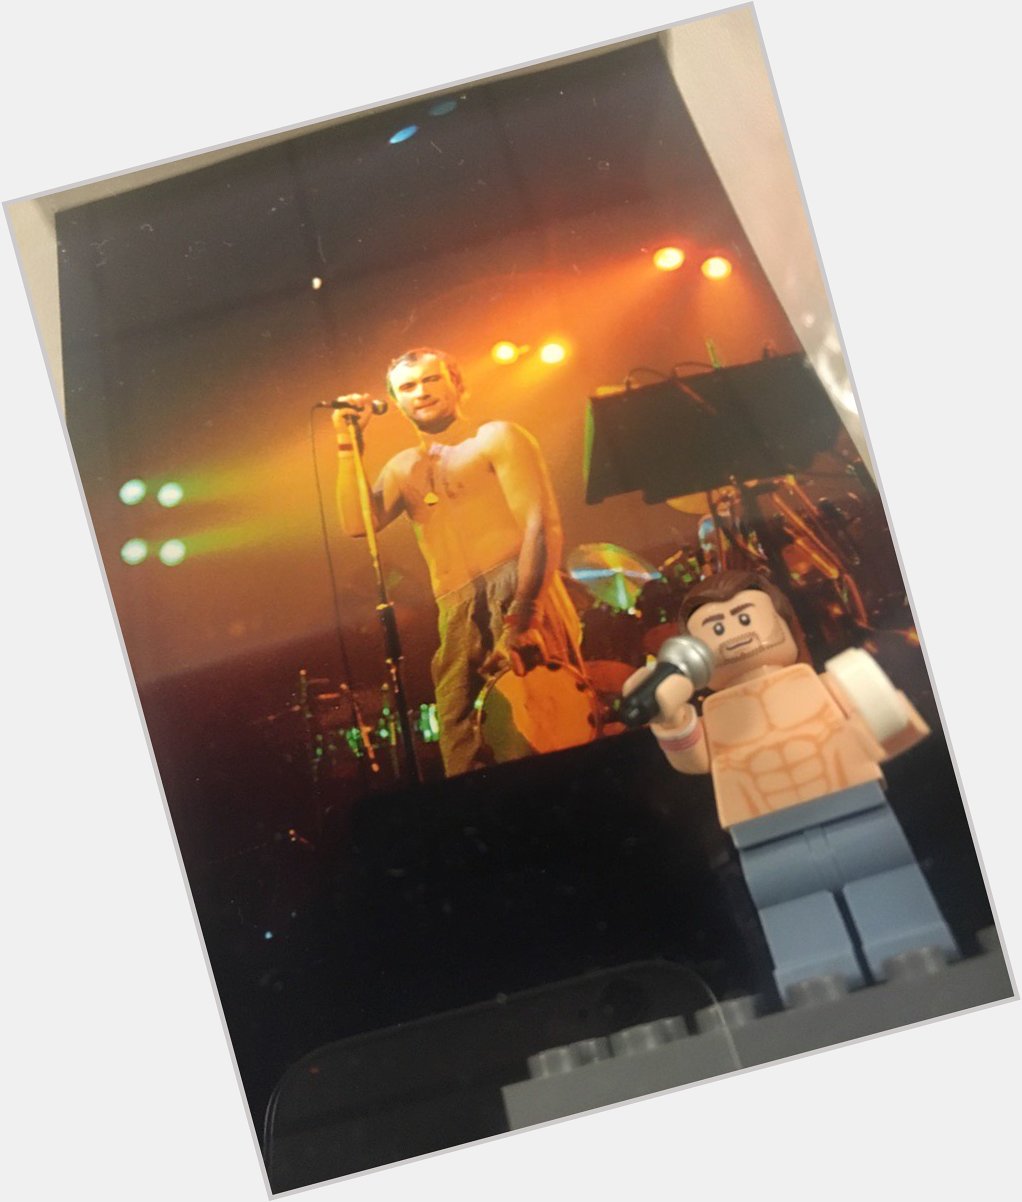 Phil collins: a legend in lego form just as he is in real life. happy 66th birthday phil! 